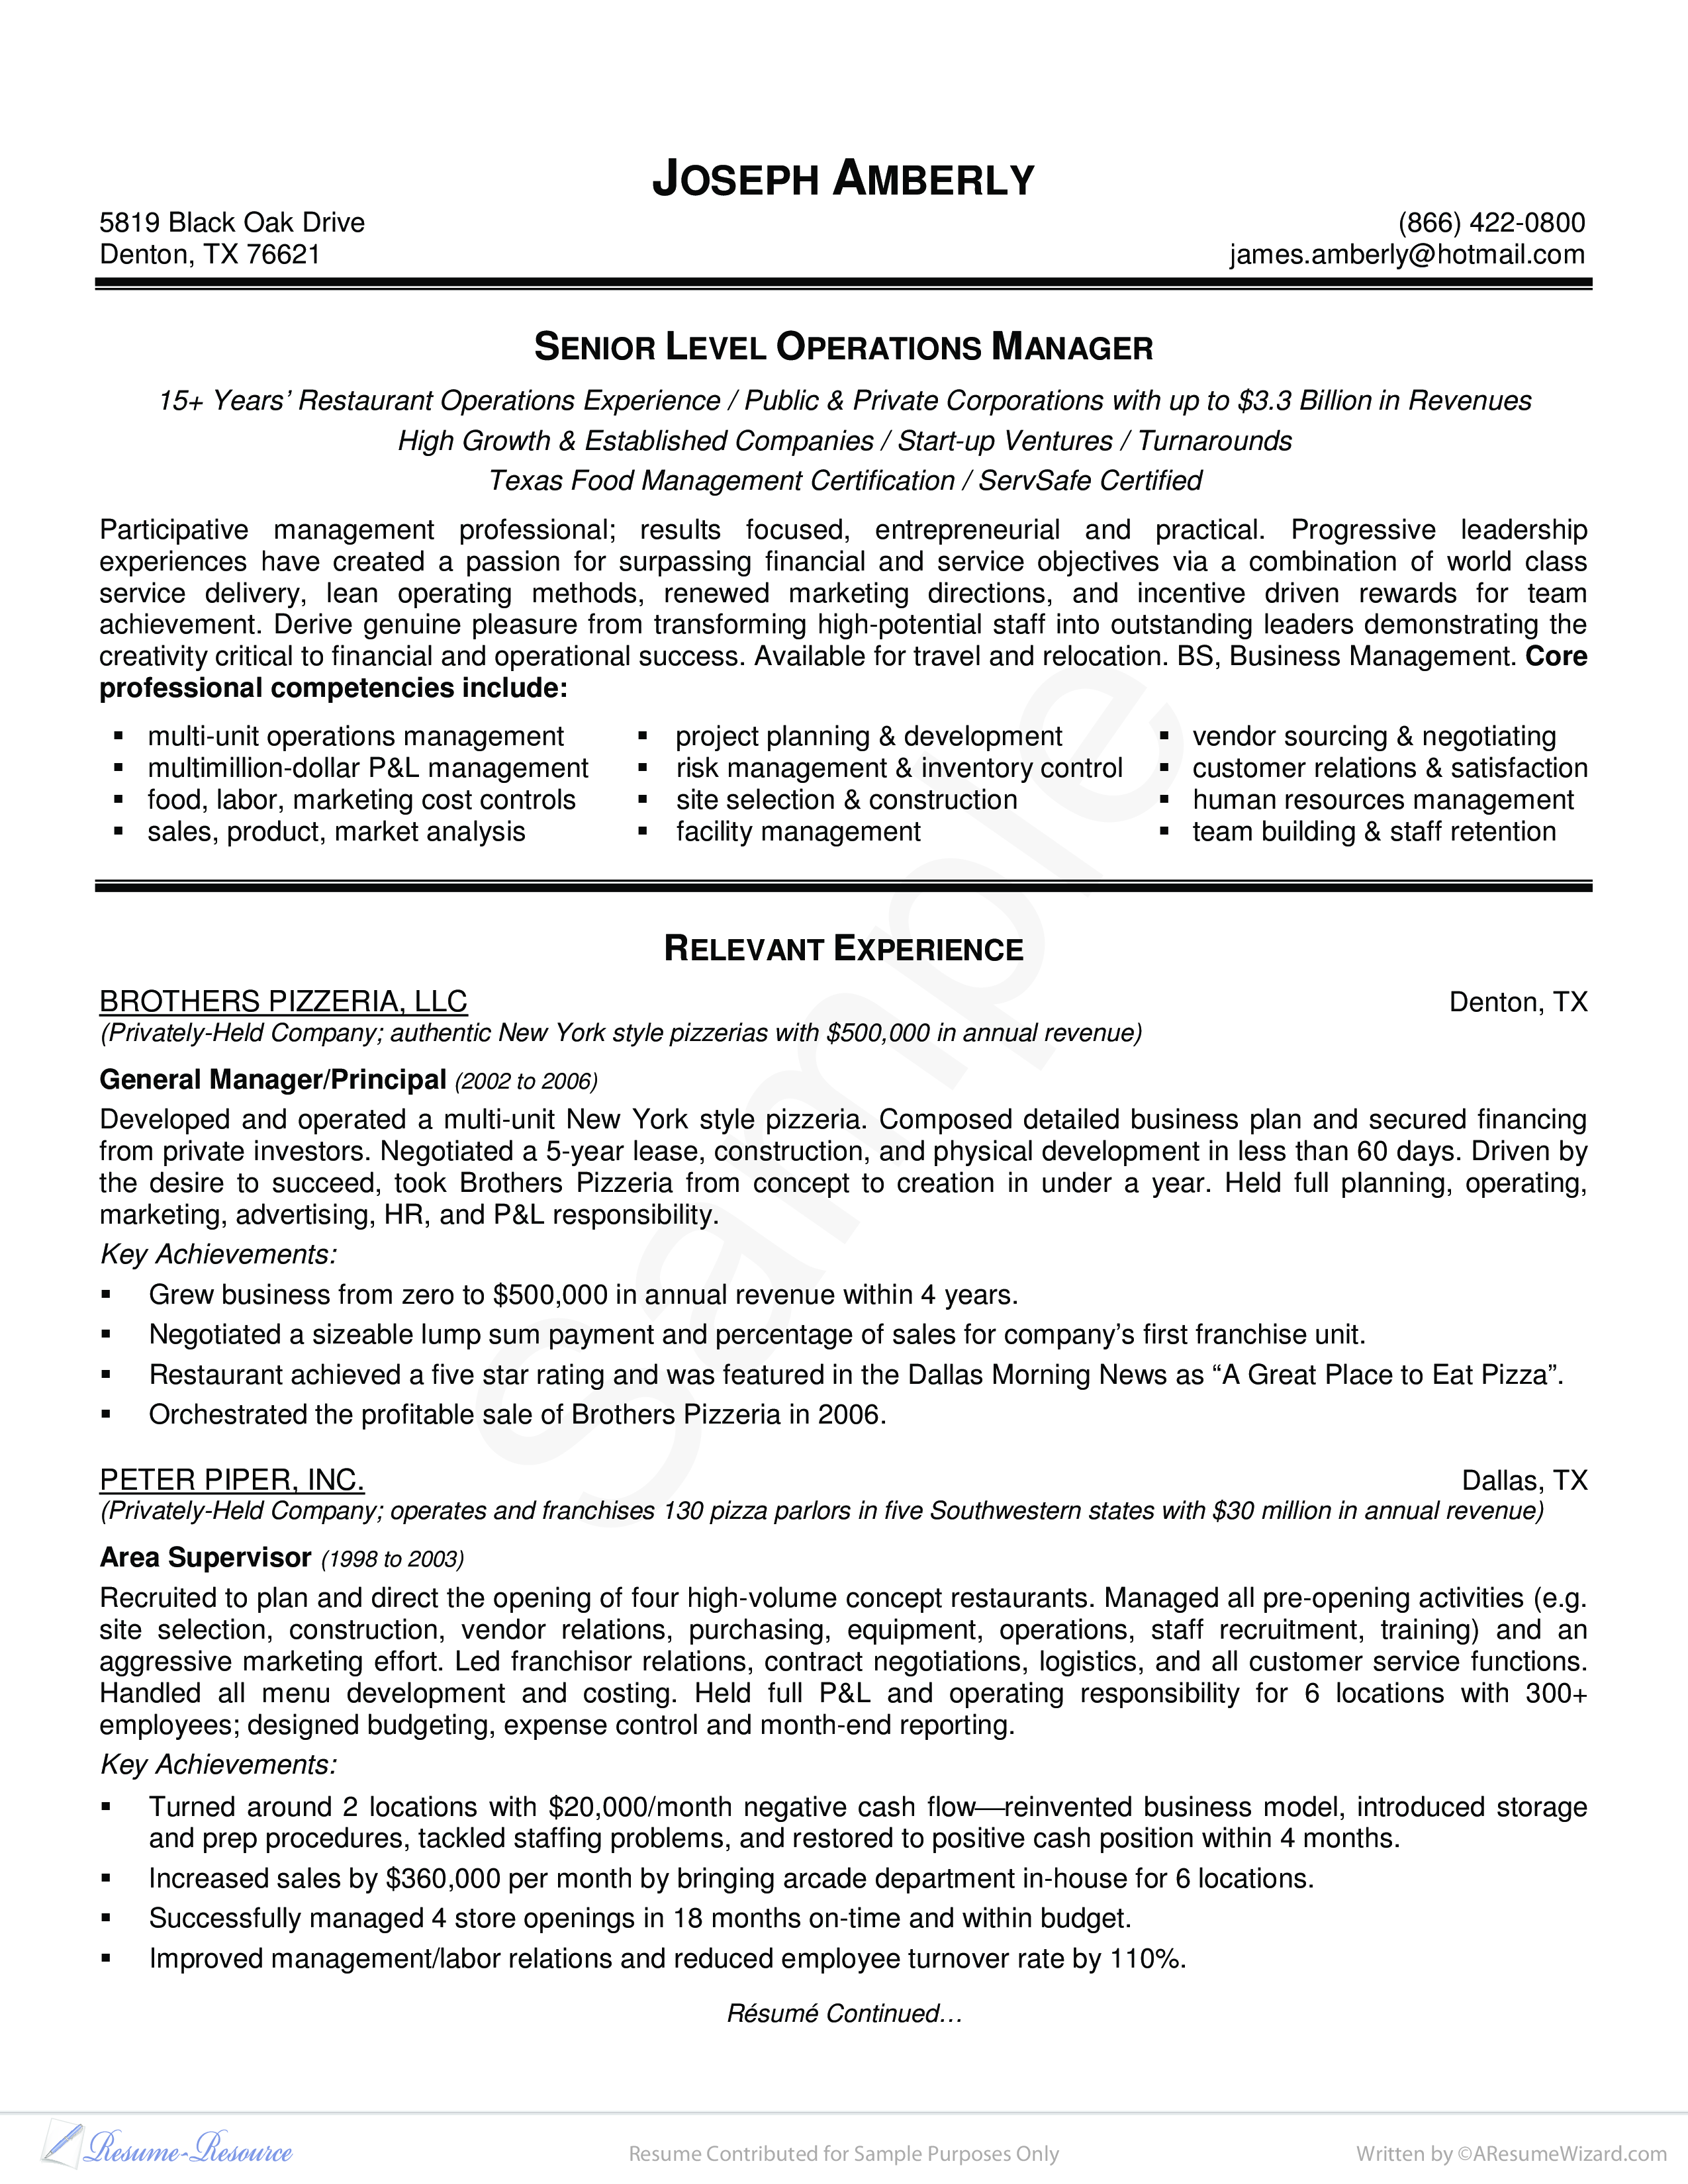 Operations Manager Resume Sample Templates at allbusinesstemplates com